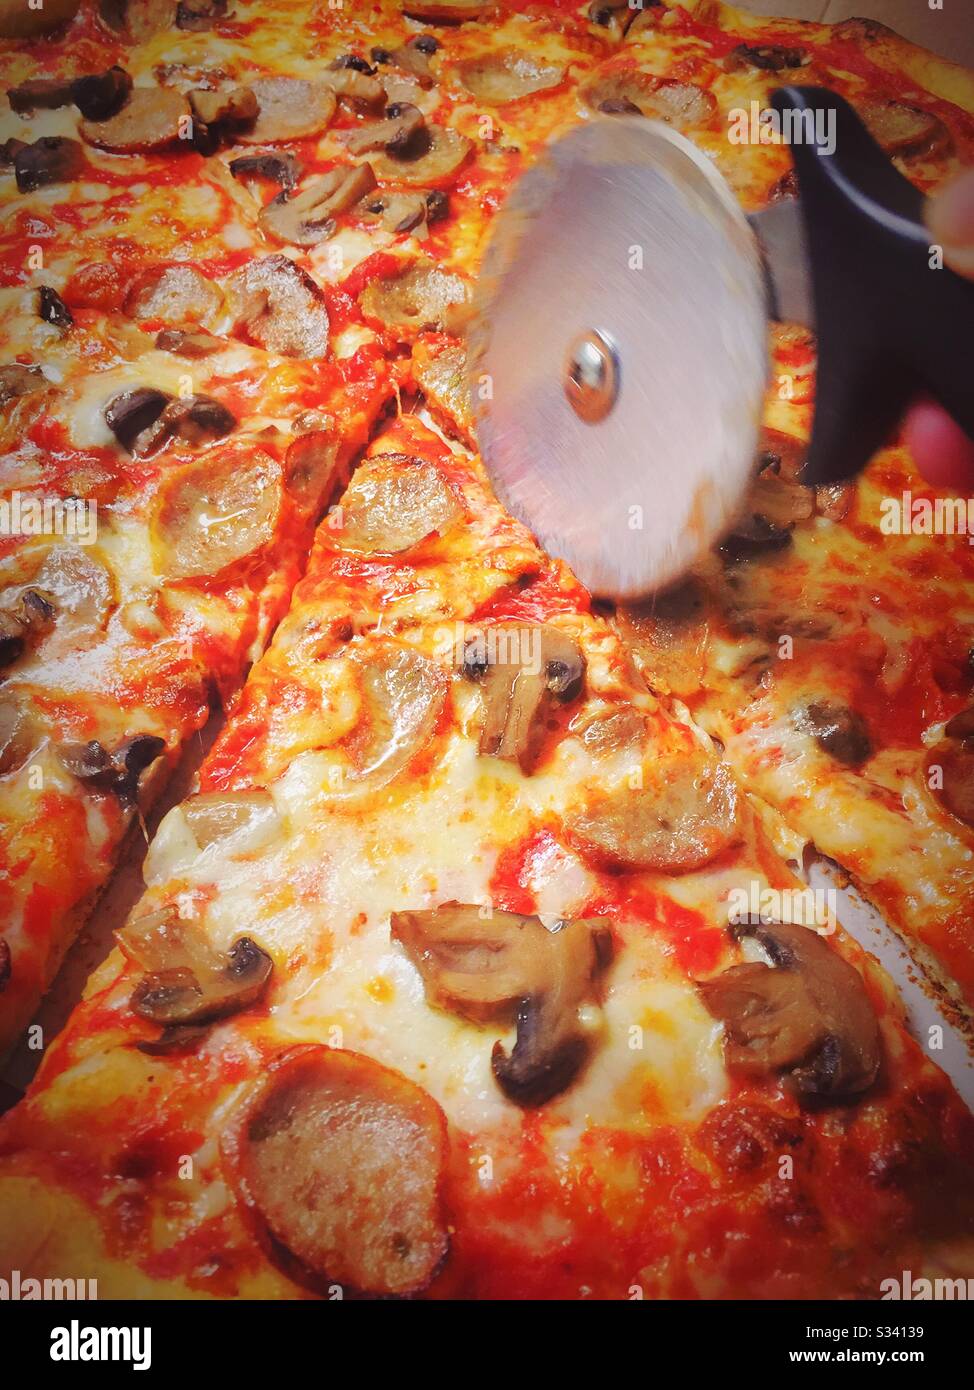 Freshly baked pizza pie with sausage and mushroom toppings being sliced by a pizza cutting wheel Stock Photo